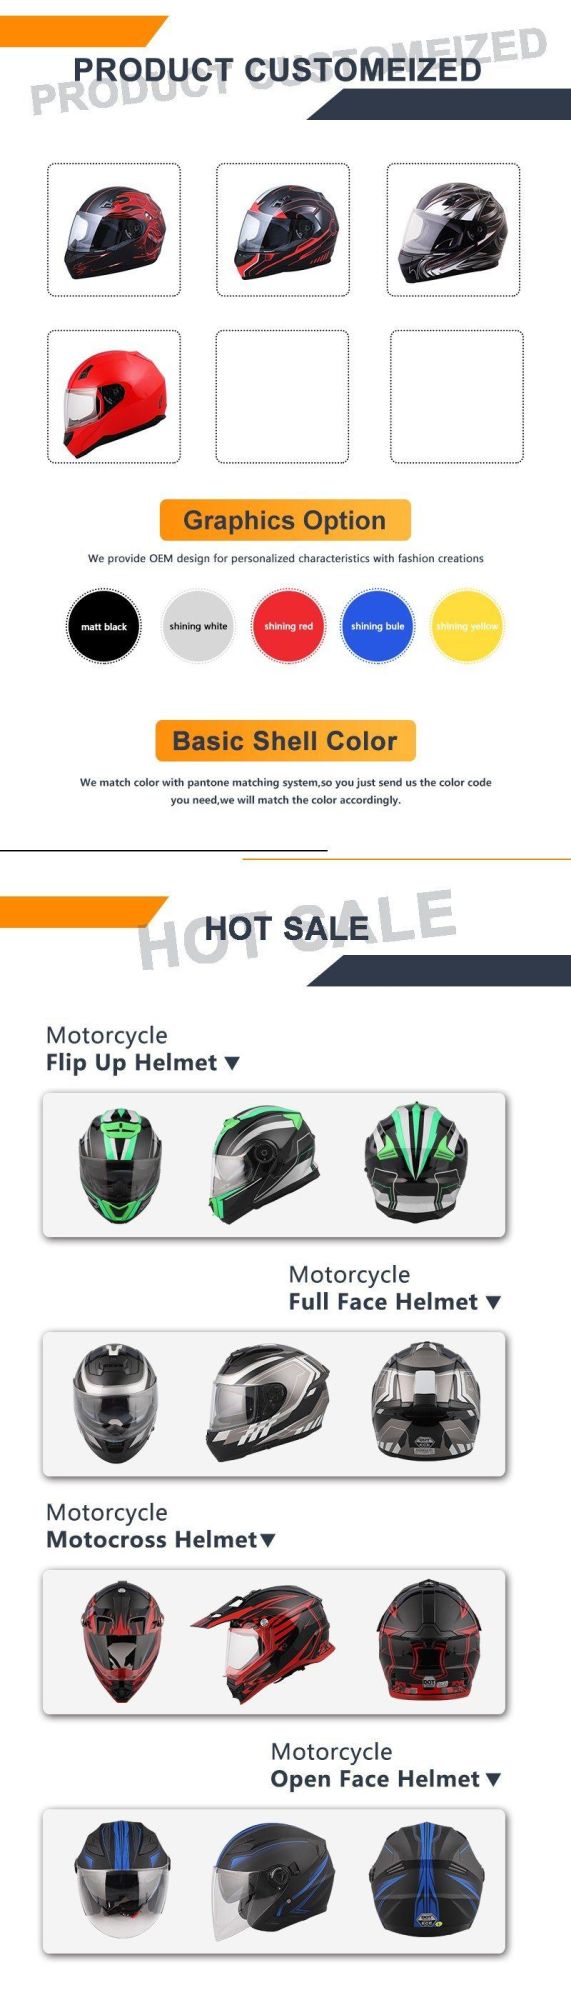 Double Visors ABS Material Open/Half Face Motorcycle Helmets